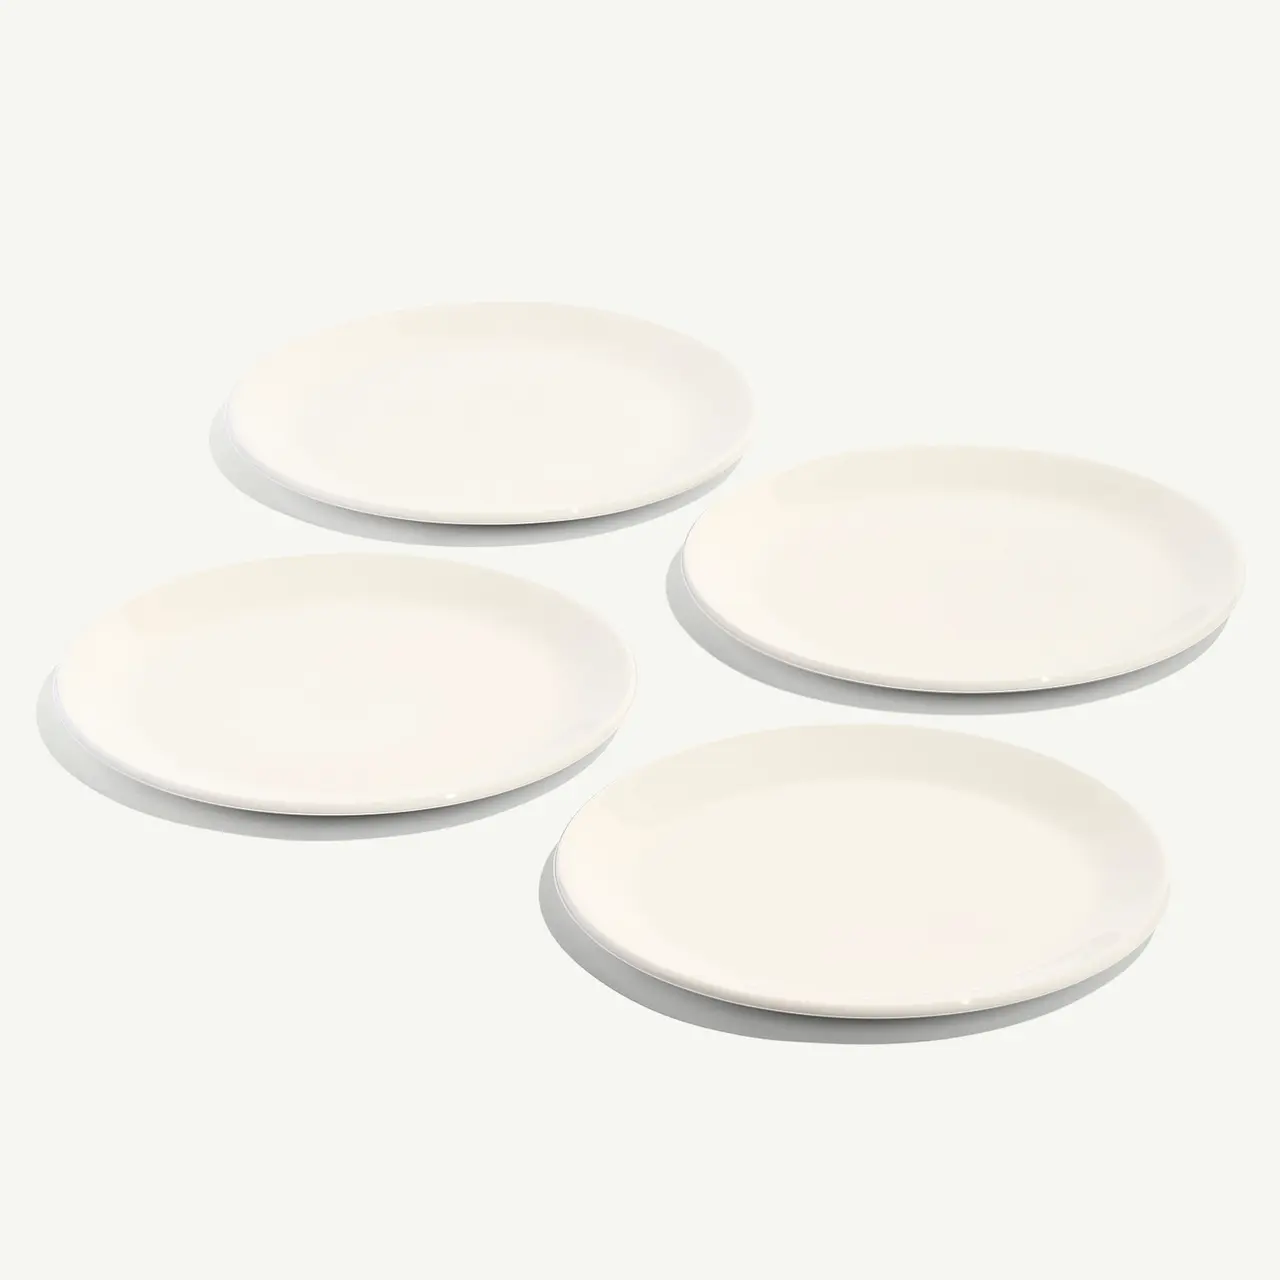 Four white plain plates are arranged on a light background.